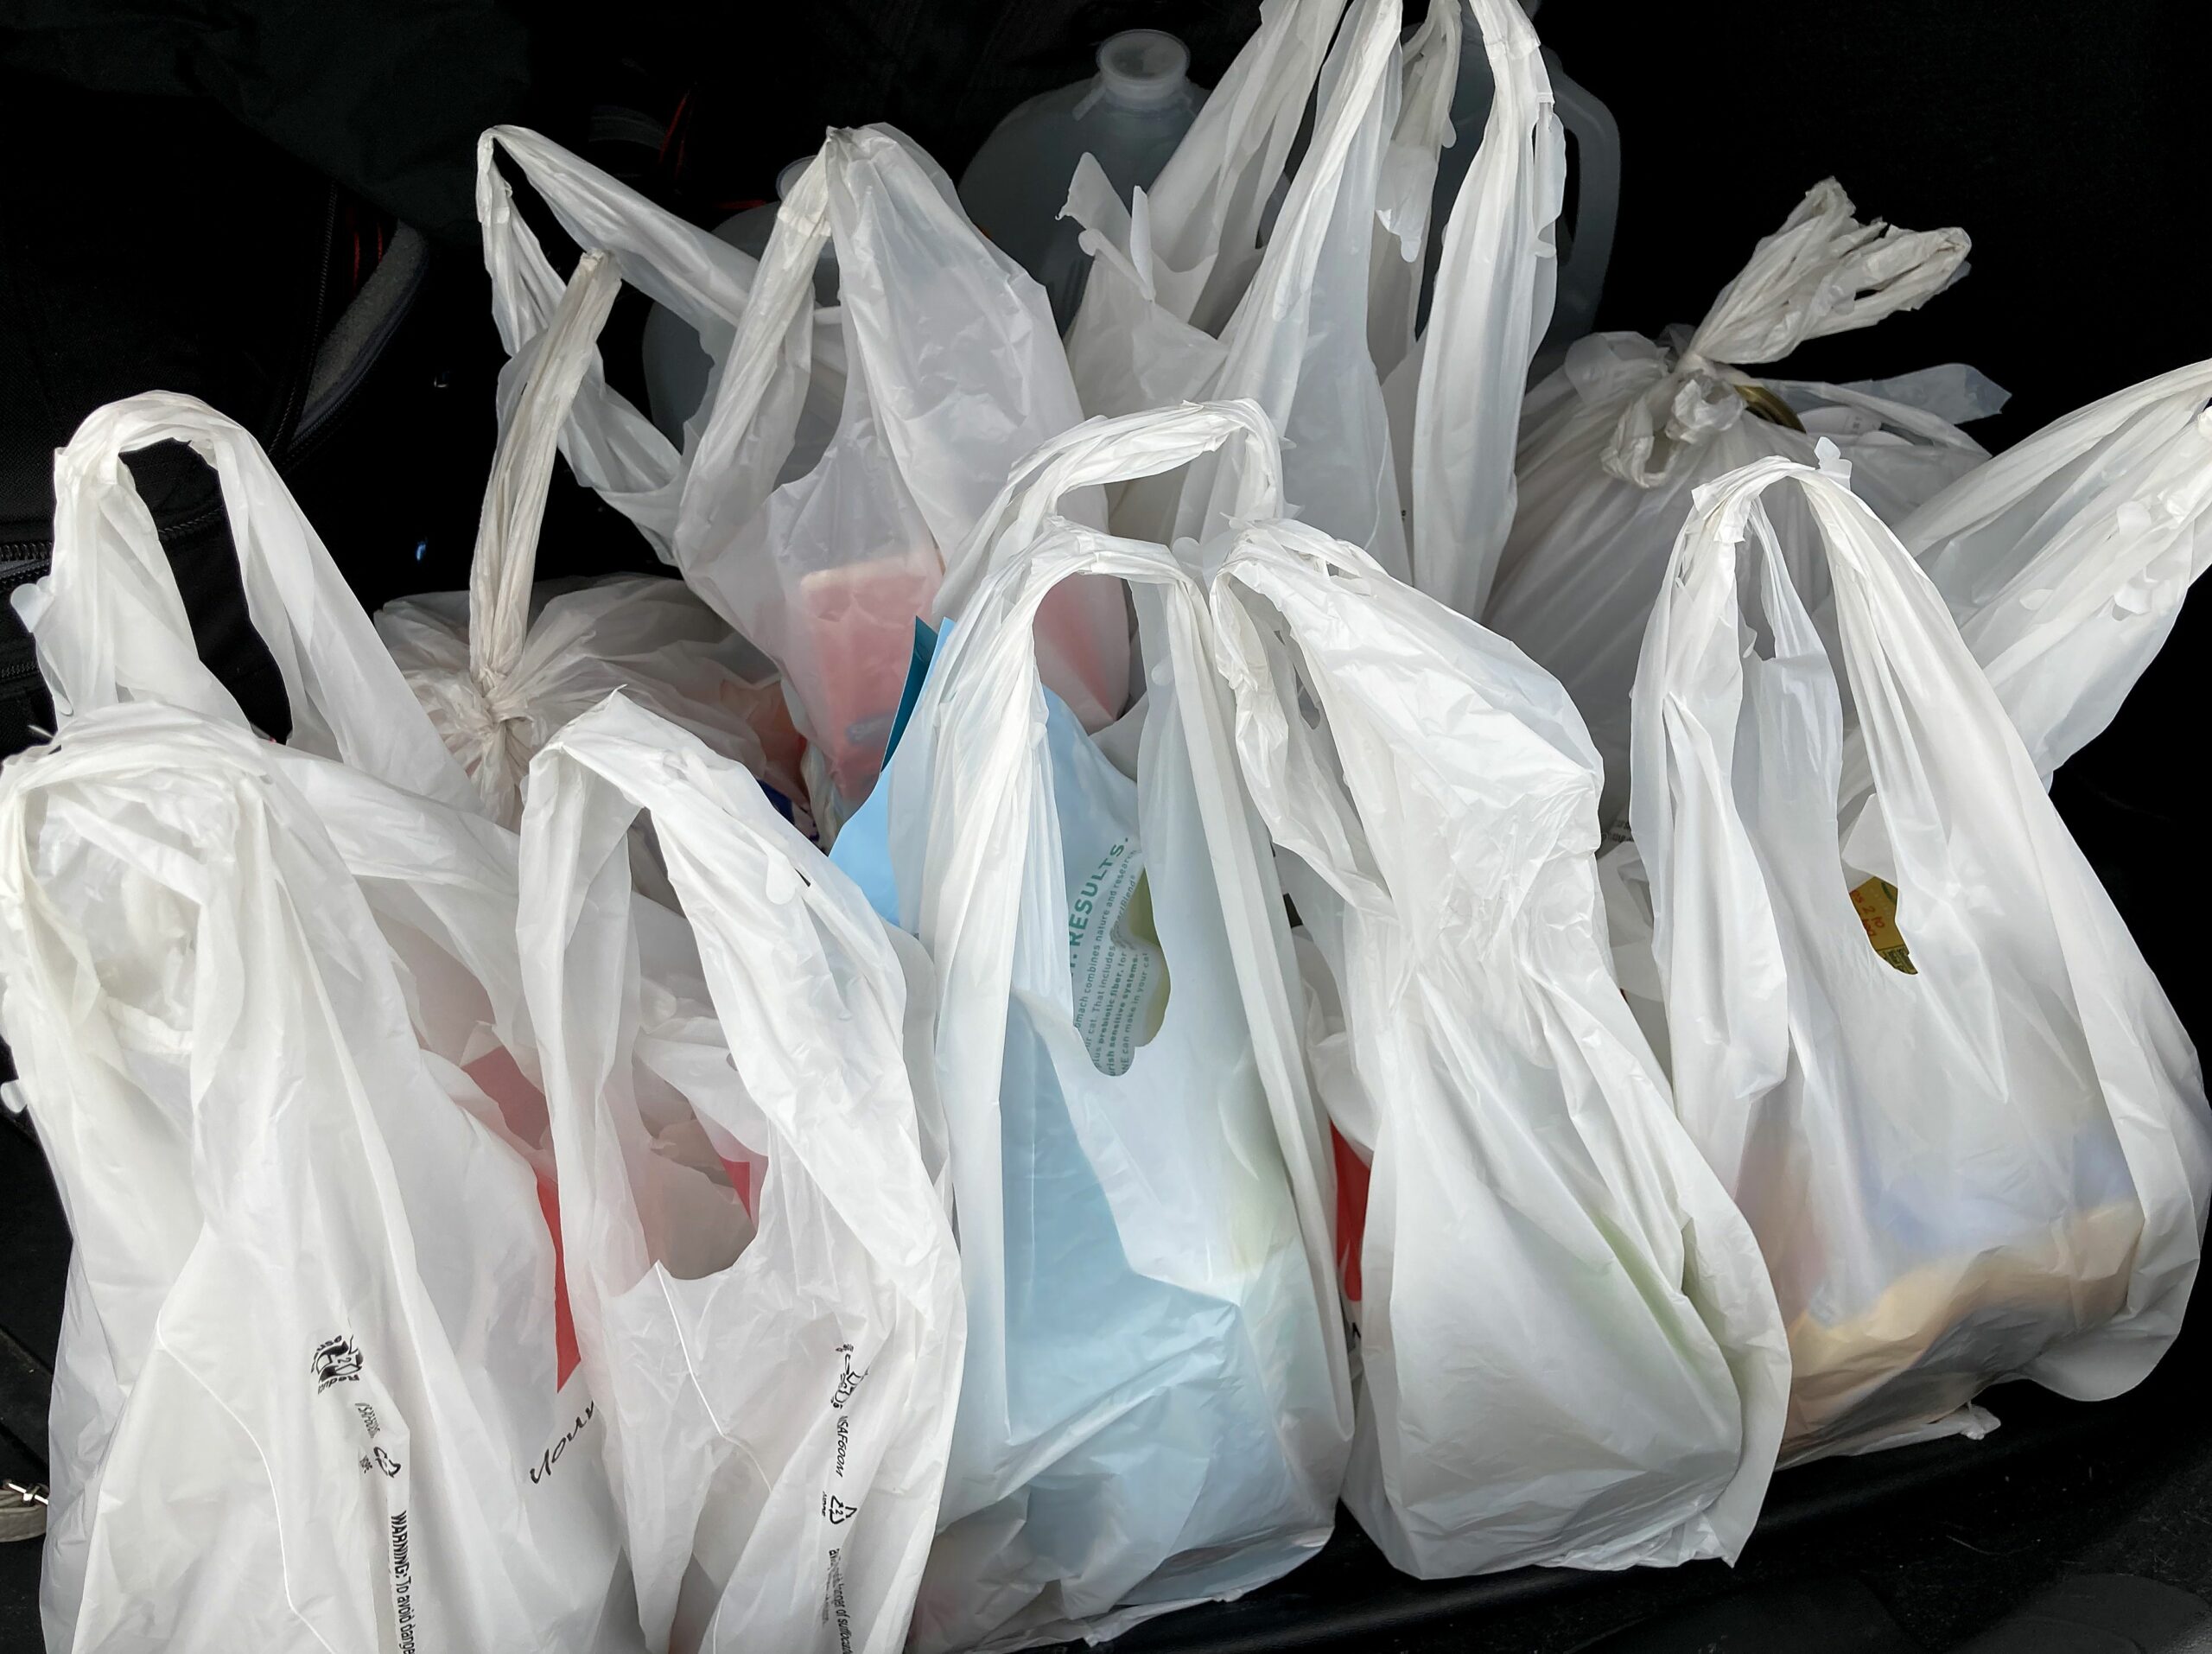 Govt bans use of plastic bags thinner than 40 microns from August 14